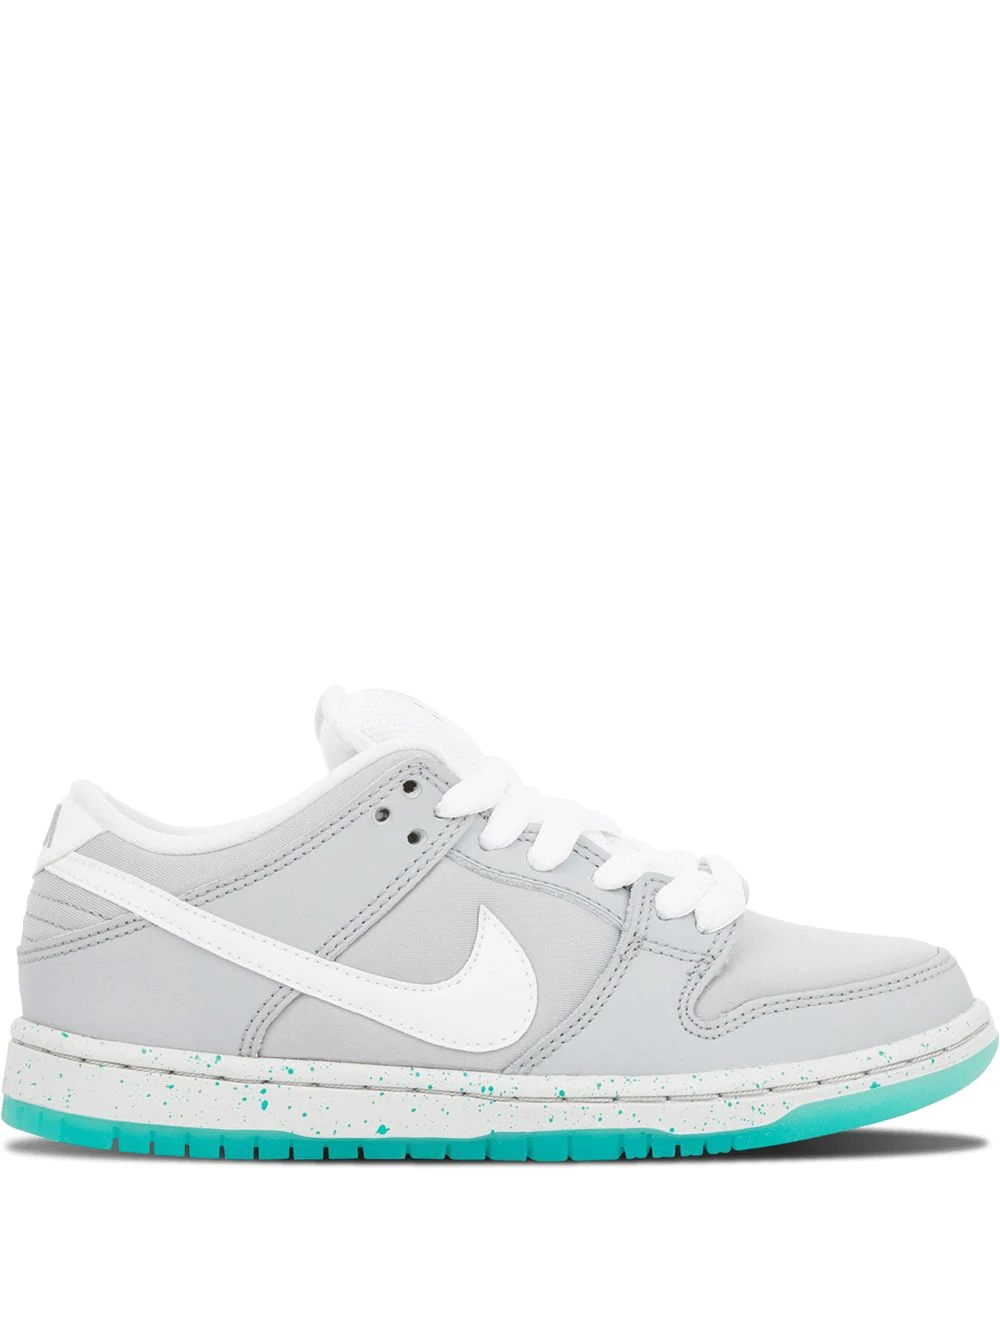 SB Dunk Low Premium "Marty Mcfly" sneakers - 1